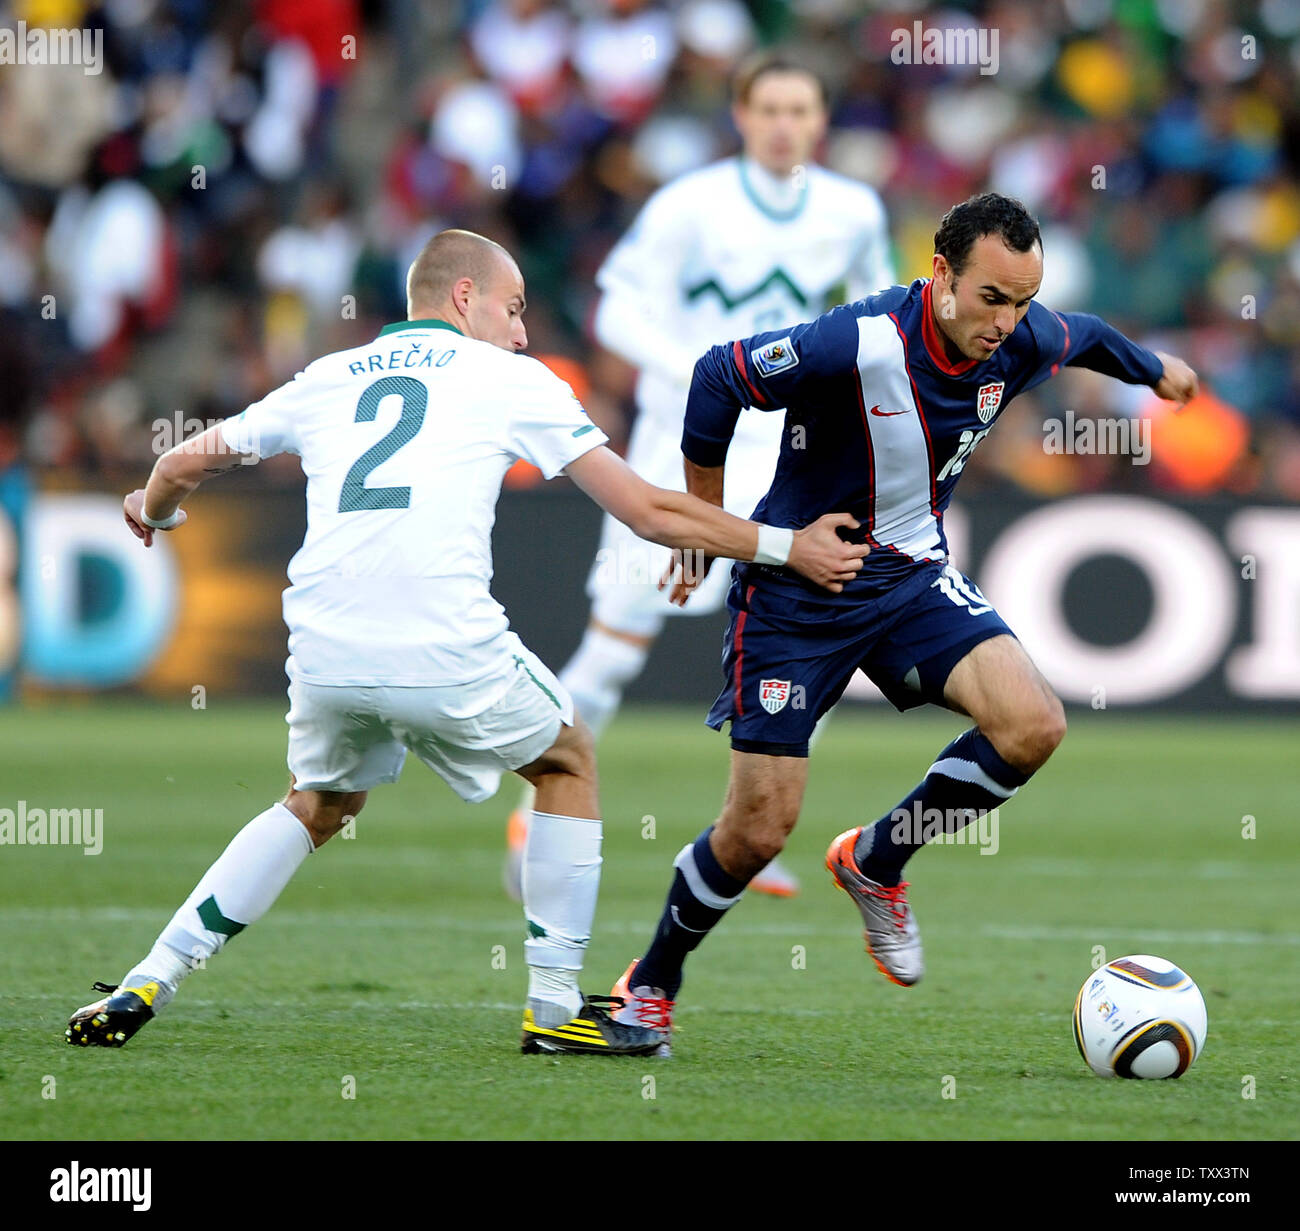 Miso Breckocof Slovenia and Landon Donovan of USA during the Group C match at Ellis Park in Johannesburg, South Africa on June 18, 2010. UPI/Chris Brunskill Stock Photo